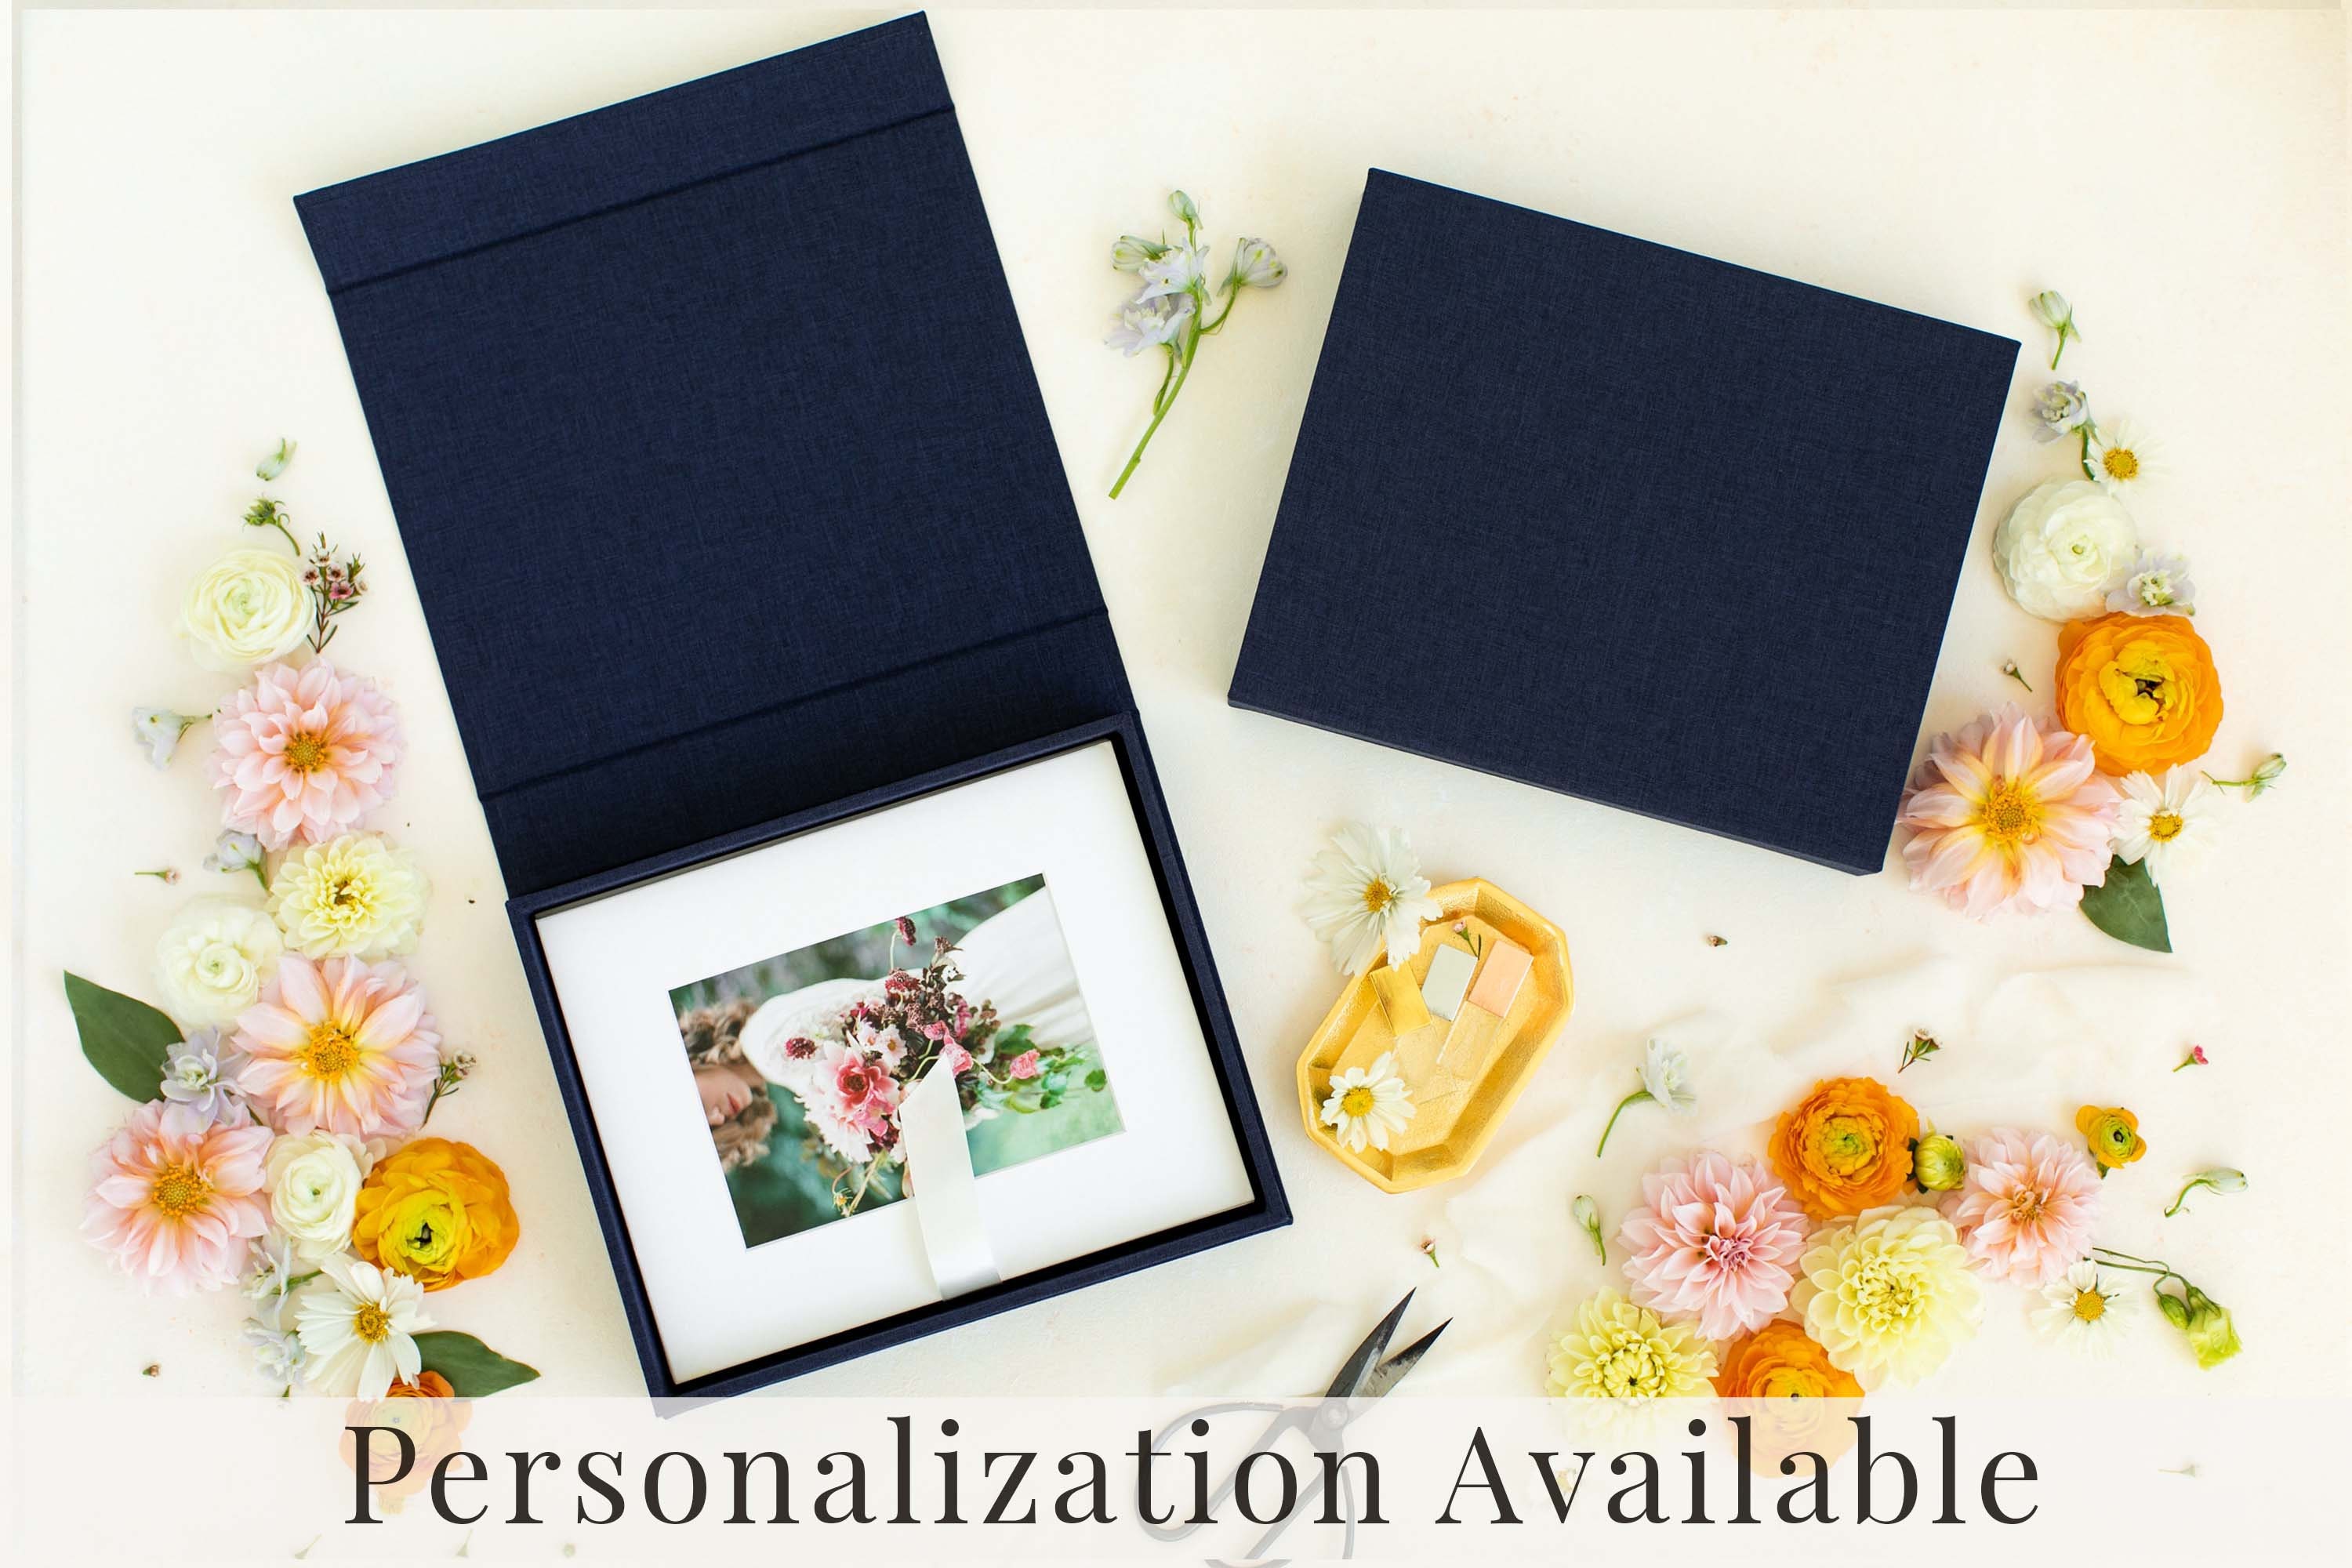  2Pcs Photo Album 8x10 Holds 72 Photos, 8x10 Photo Album Linen  Cover with Front Window, 72 Pockets for 8x10 Photos, 8x10 Photo Album Book  for 8x10 Wedding Family Baby Anniversary Pictures (